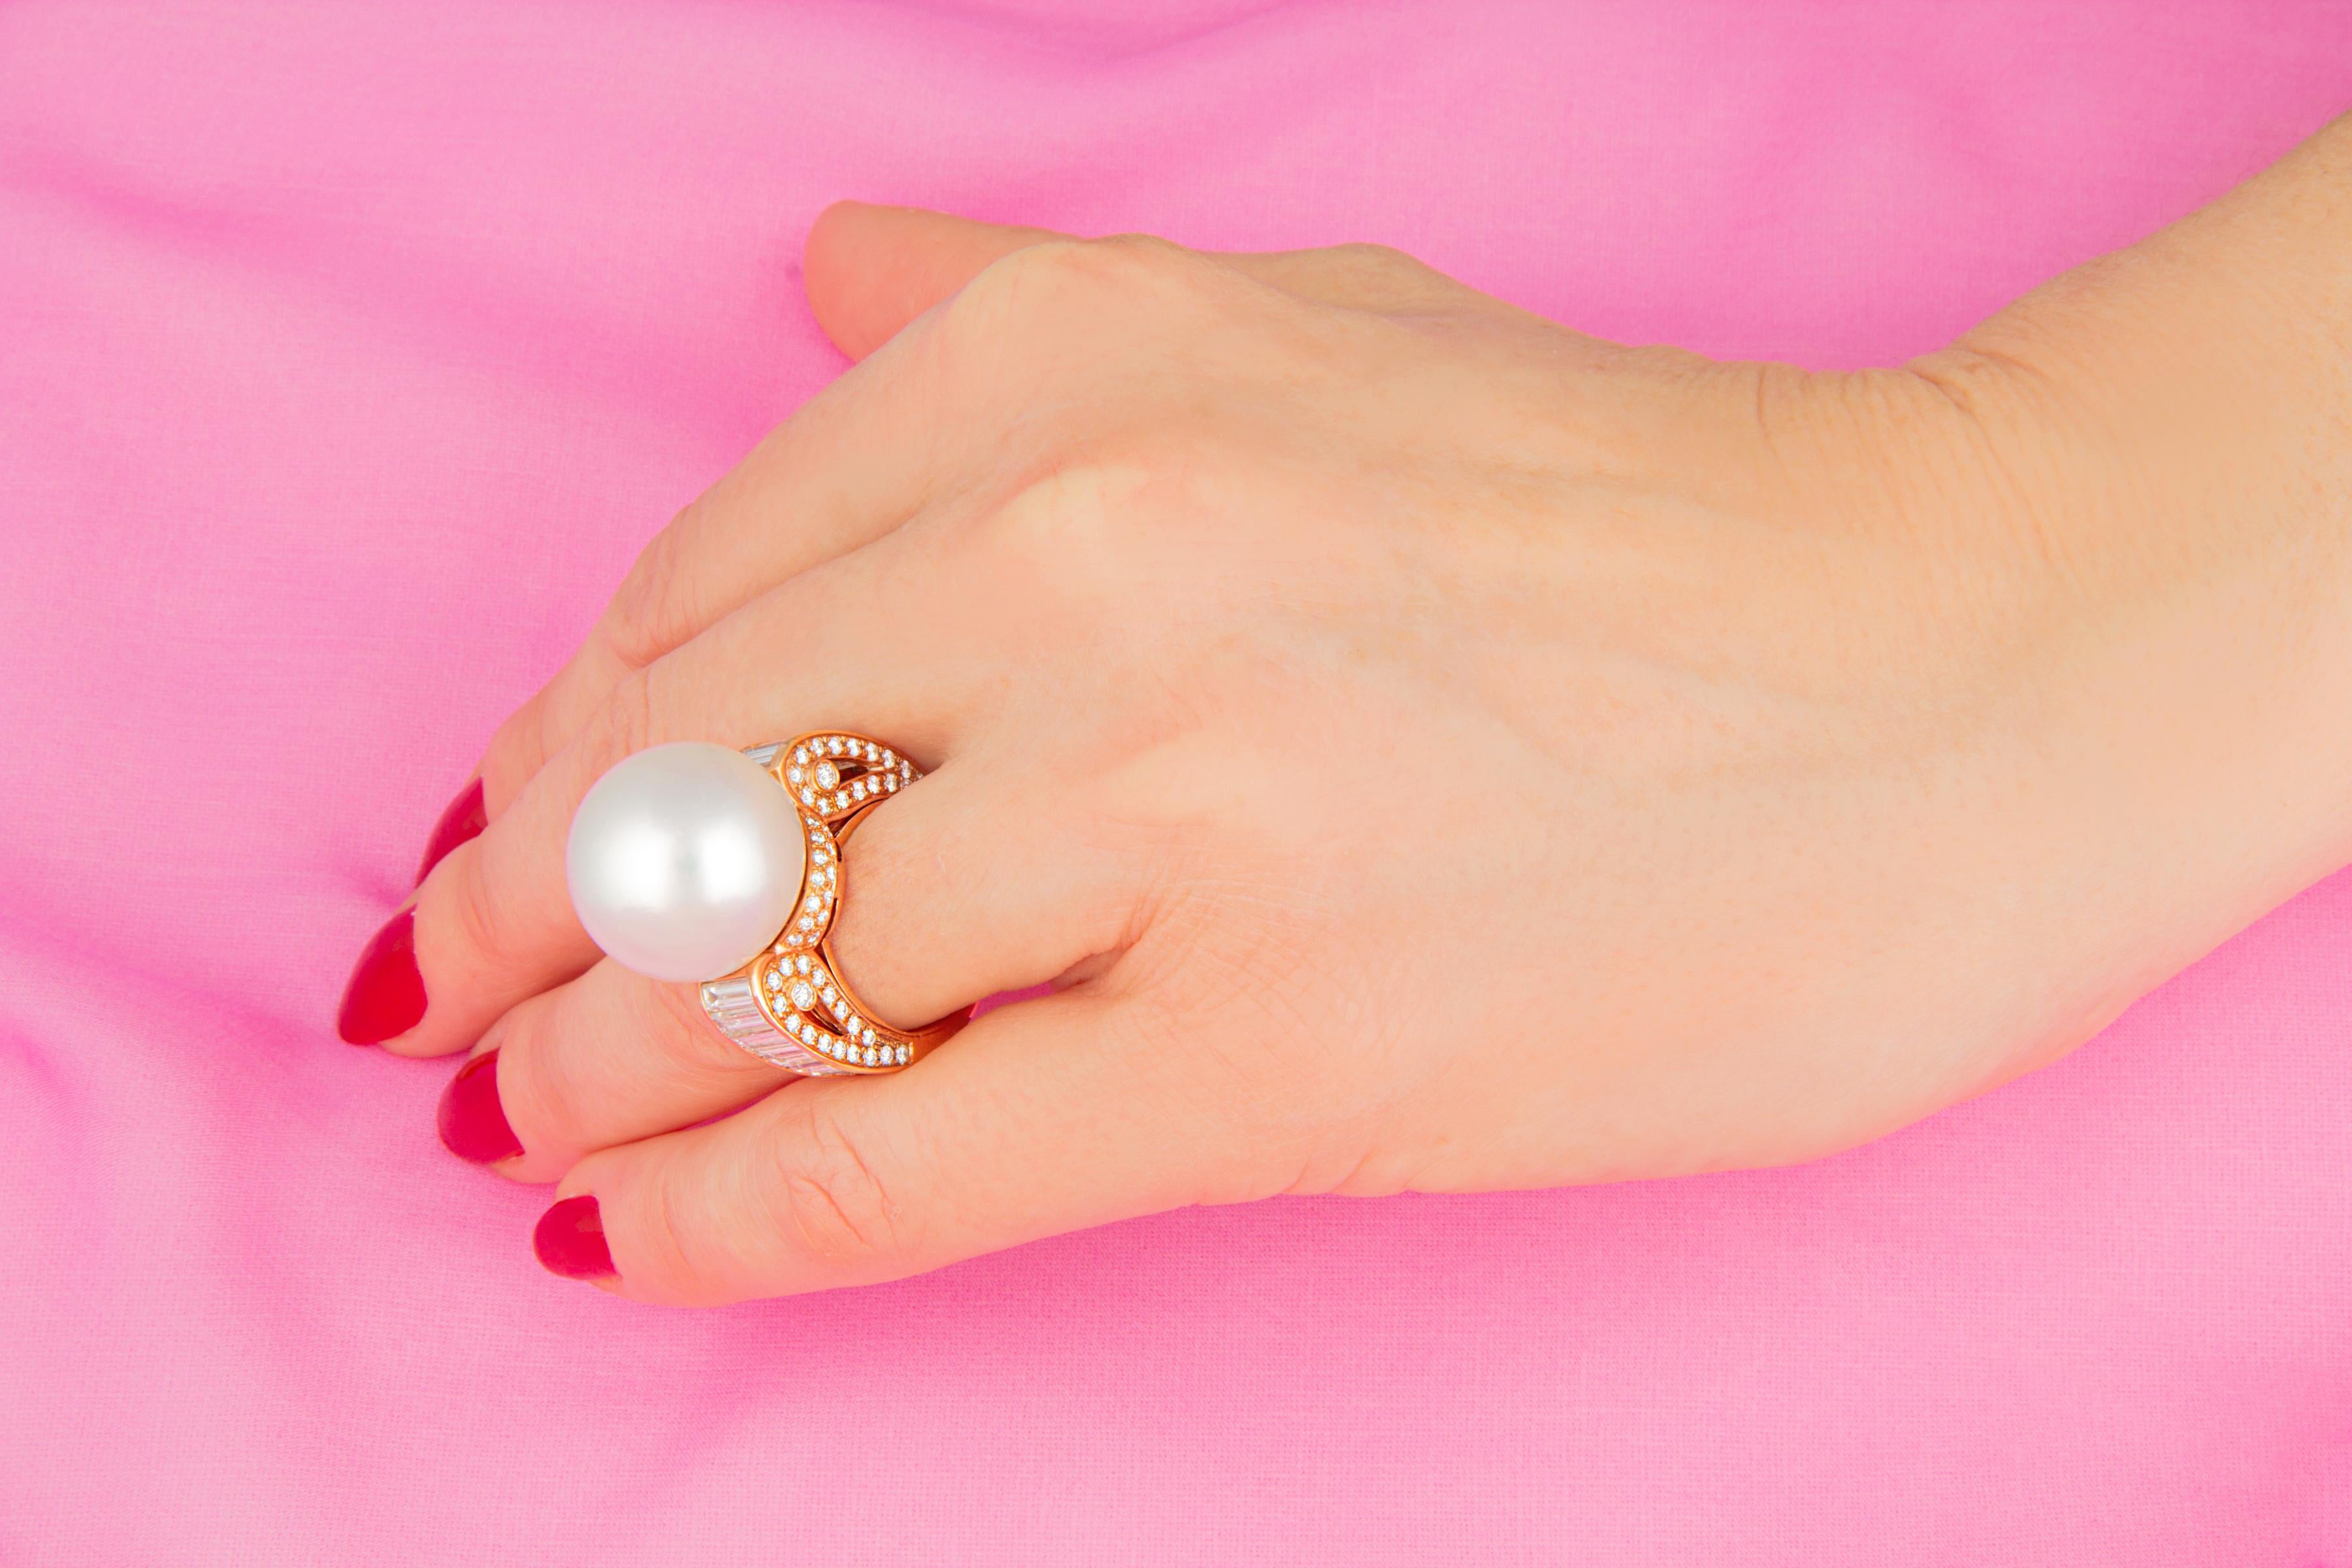 This South Sea pearl and diamond cocktail ring features a gem quality South Sea pearl of the extraordinary size of 18.5mm diameter and pinkish hues. The pearl is untreated. It displays a splendid nacre and its natural color and luster have not been